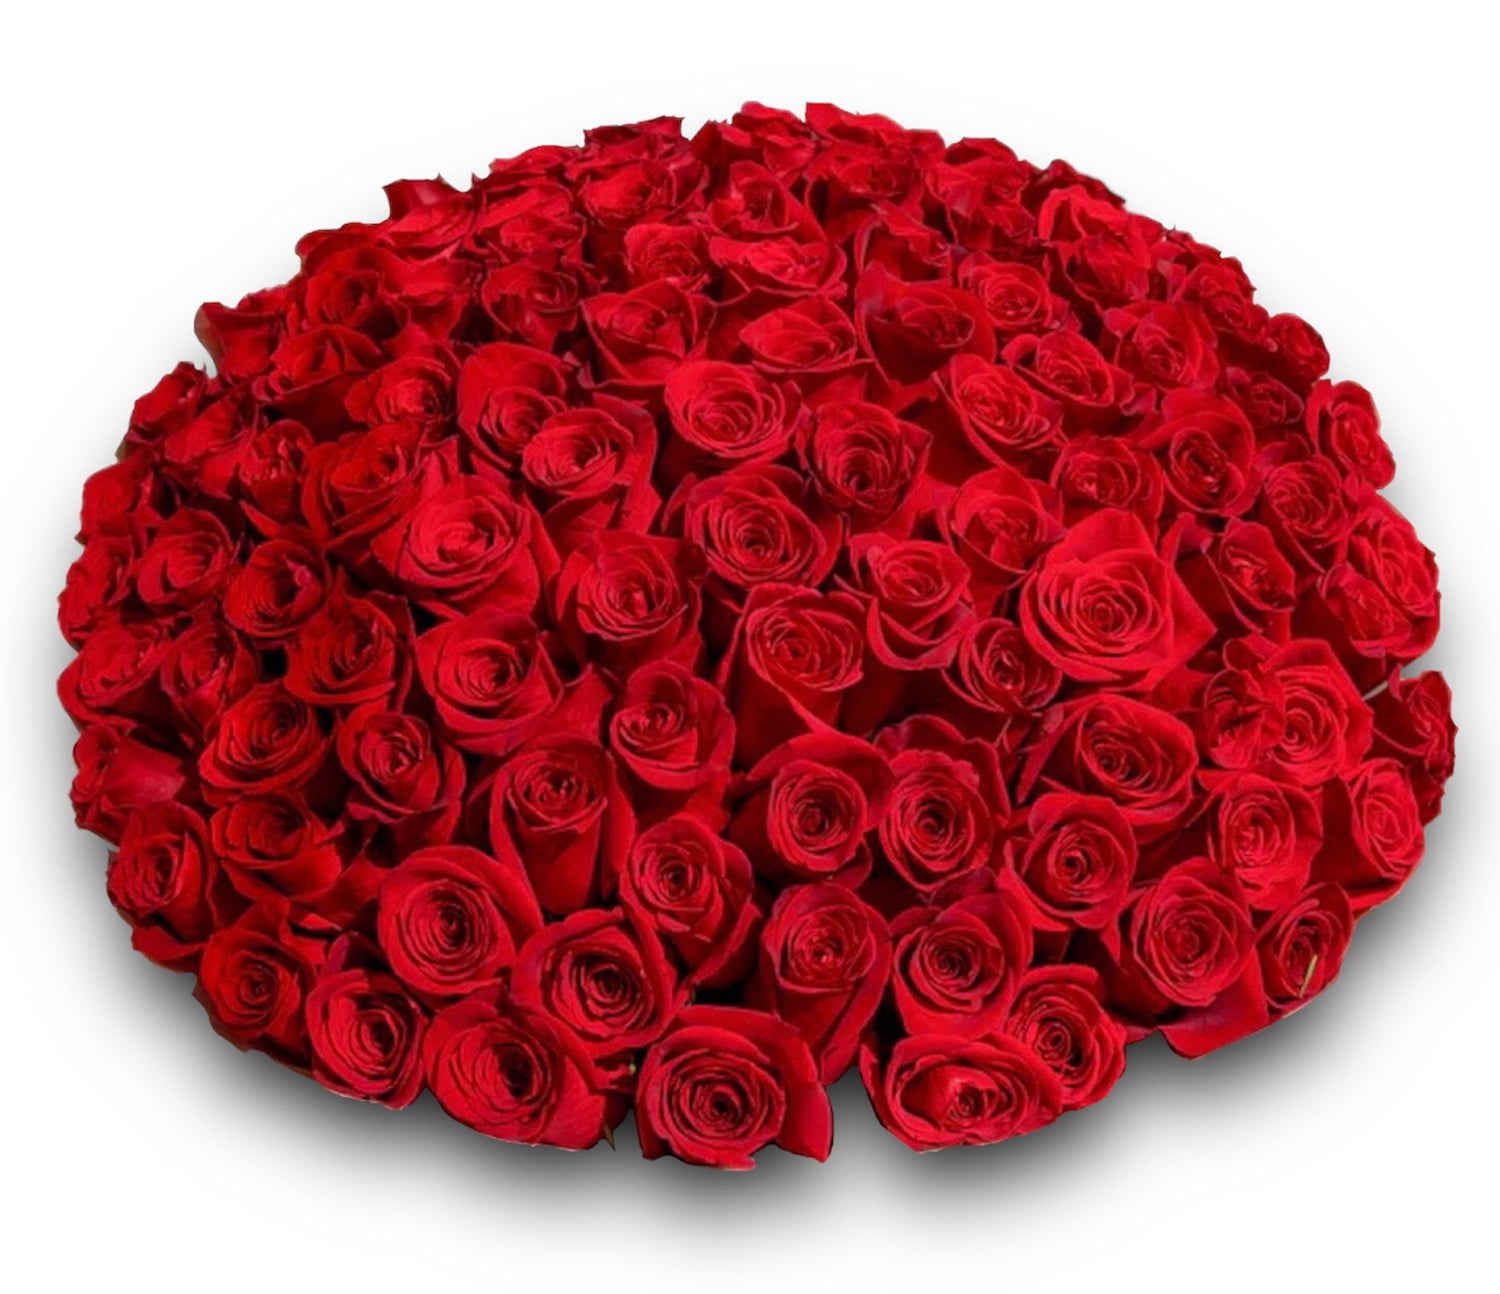 200 Red Roses 